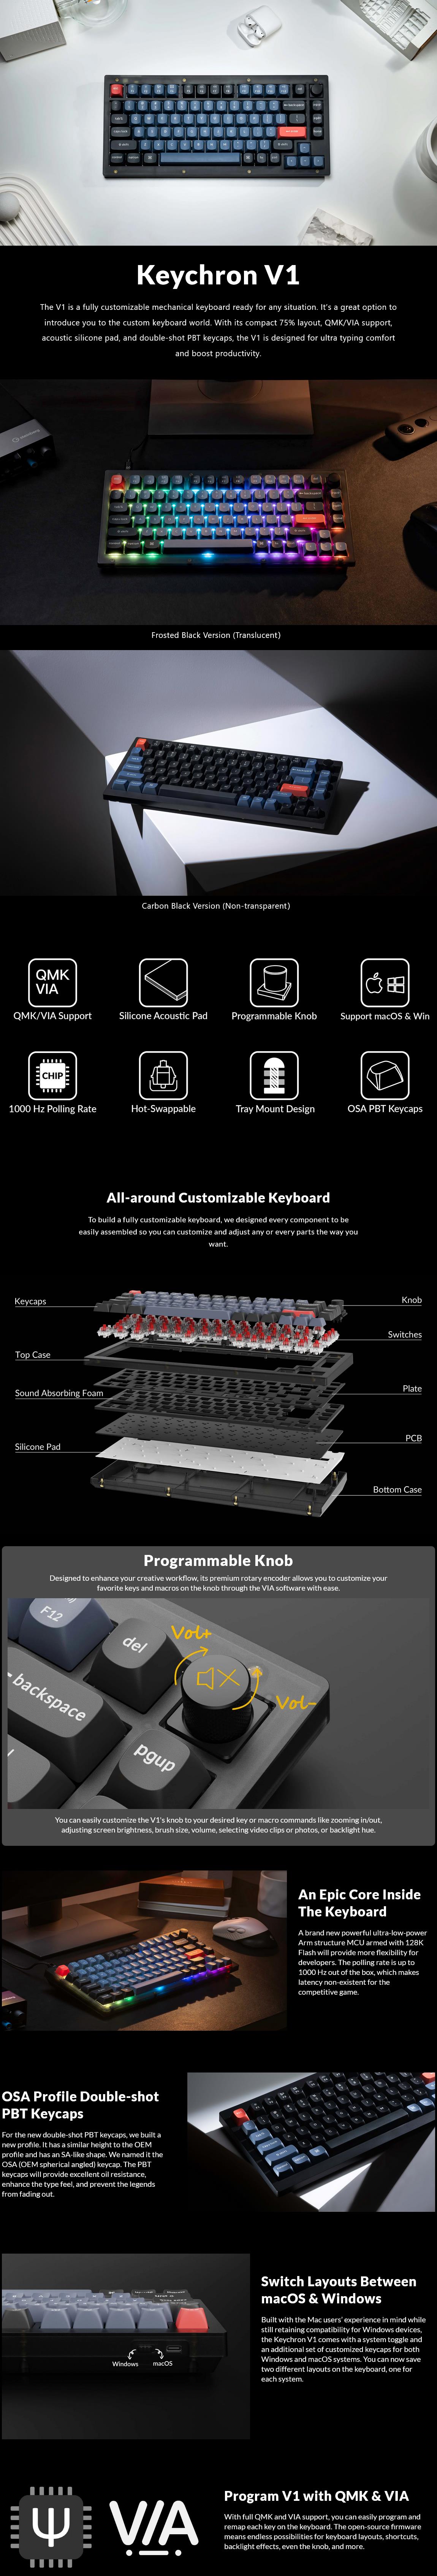 A large marketing image providing additional information about the product Keychron V1 RGB 75% Mechanical Keyboard - Carbon Black (Brown Switch) - Additional alt info not provided